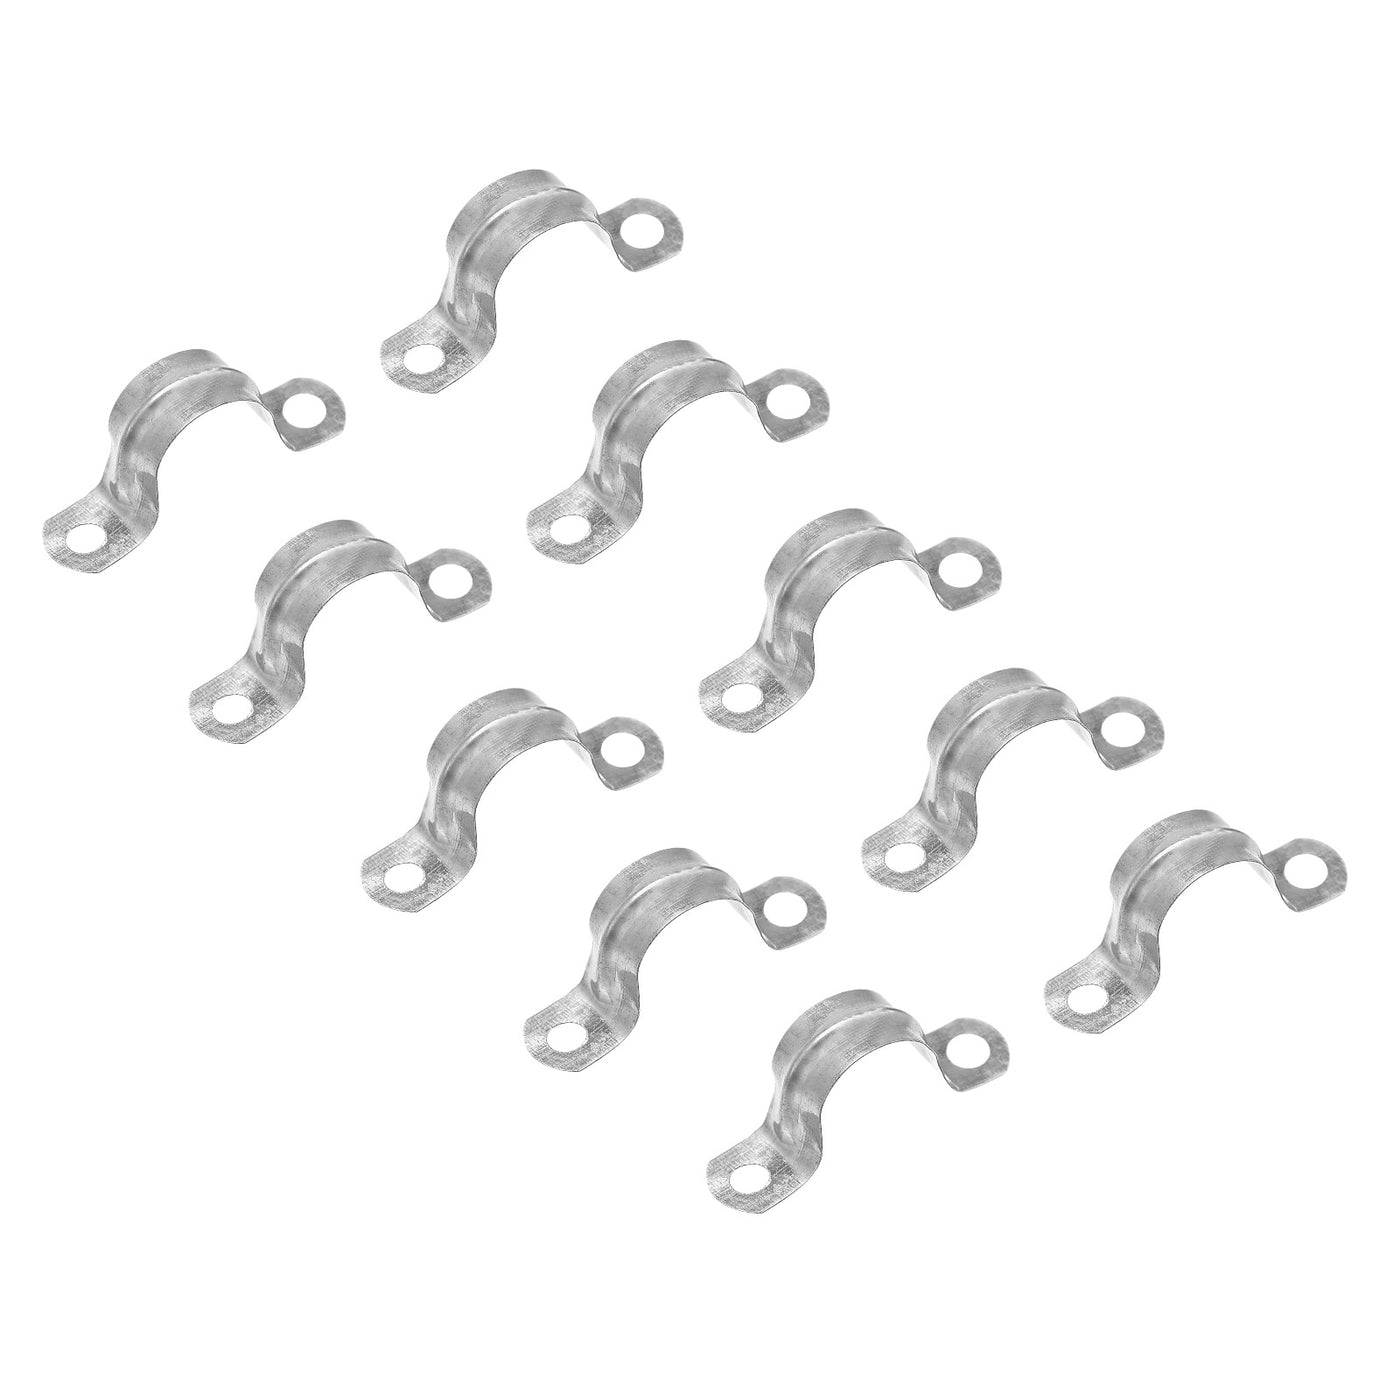 uxcell Uxcell Rigid Pipe Strap 16pcs 5/8" (16mm) Carbon Steel U Bracket Tension Tube Clamp